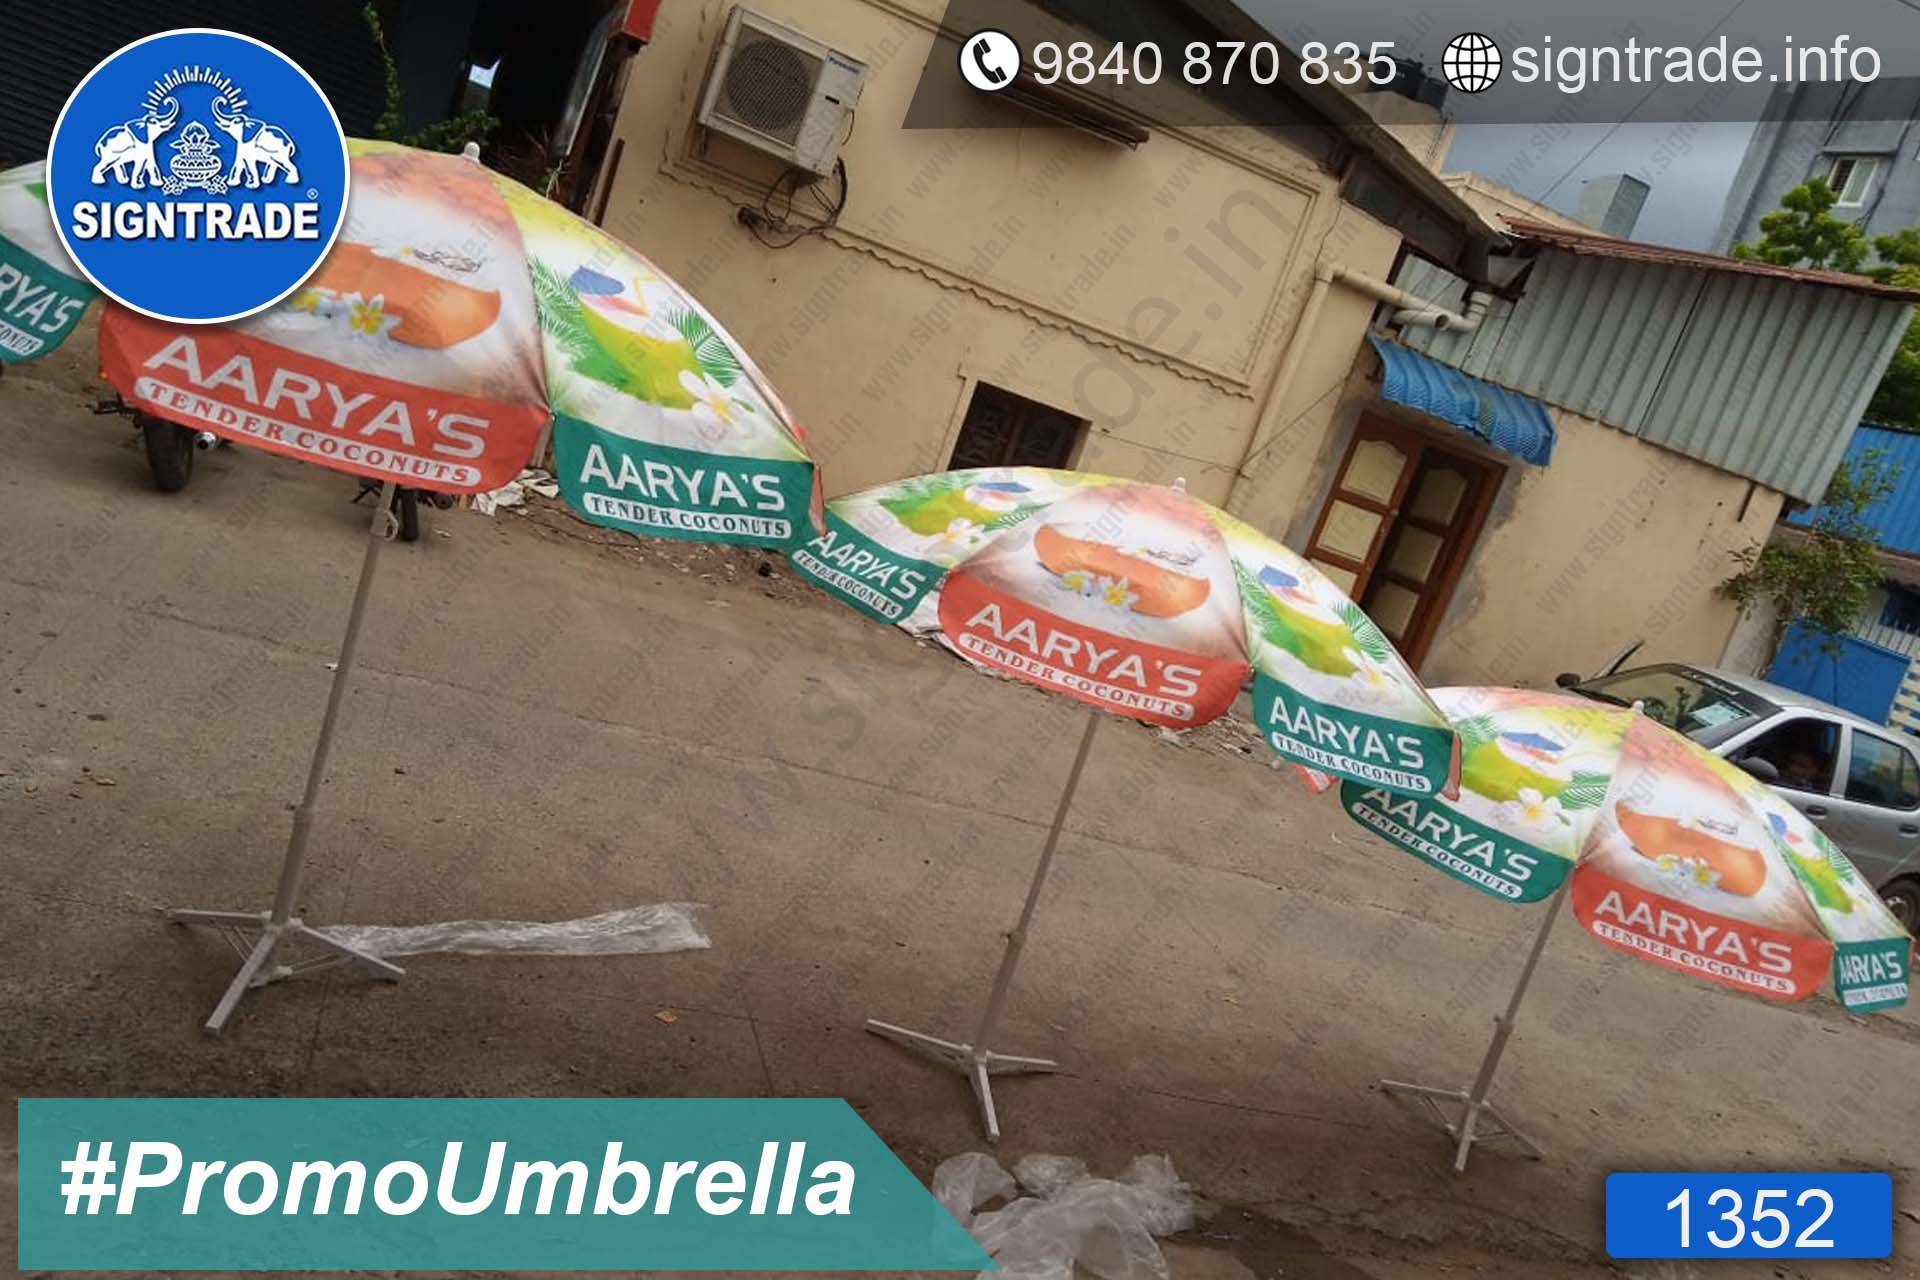 AARYA'S Tender Coconuts - Chennai - SIGNTRADE - Promotional Umbrella Manufactures in Chennai